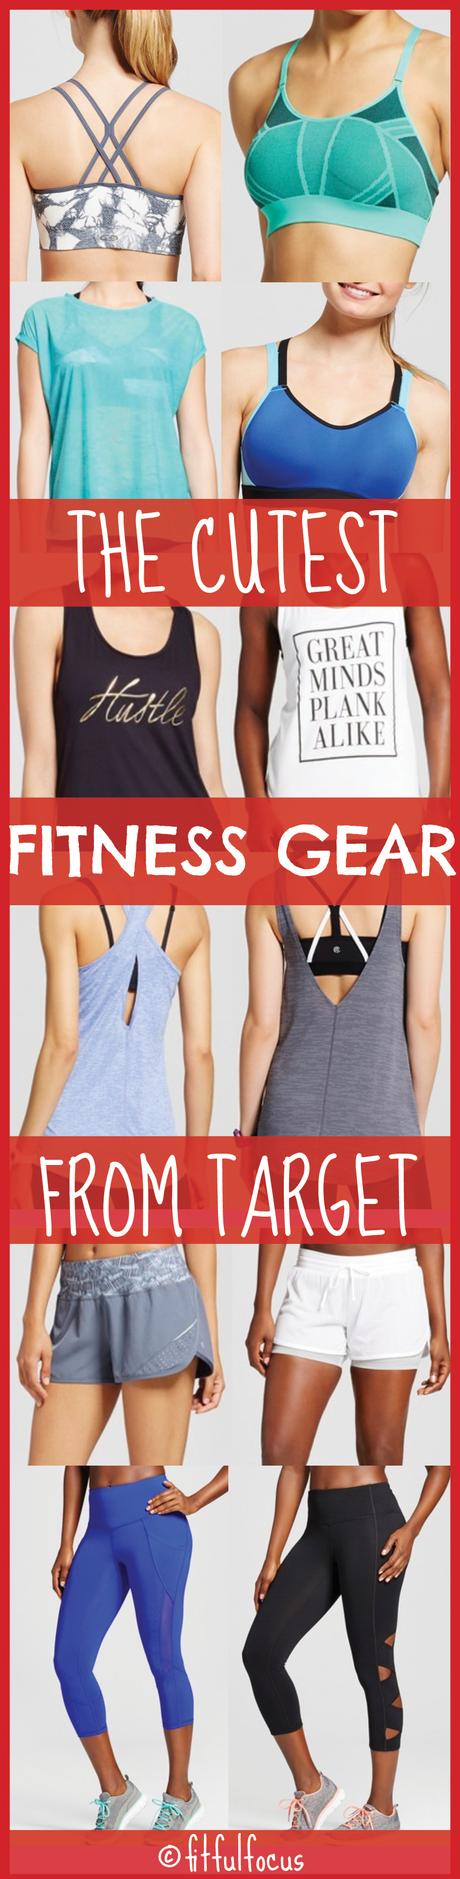 The Cutest Fitness Gear From Target